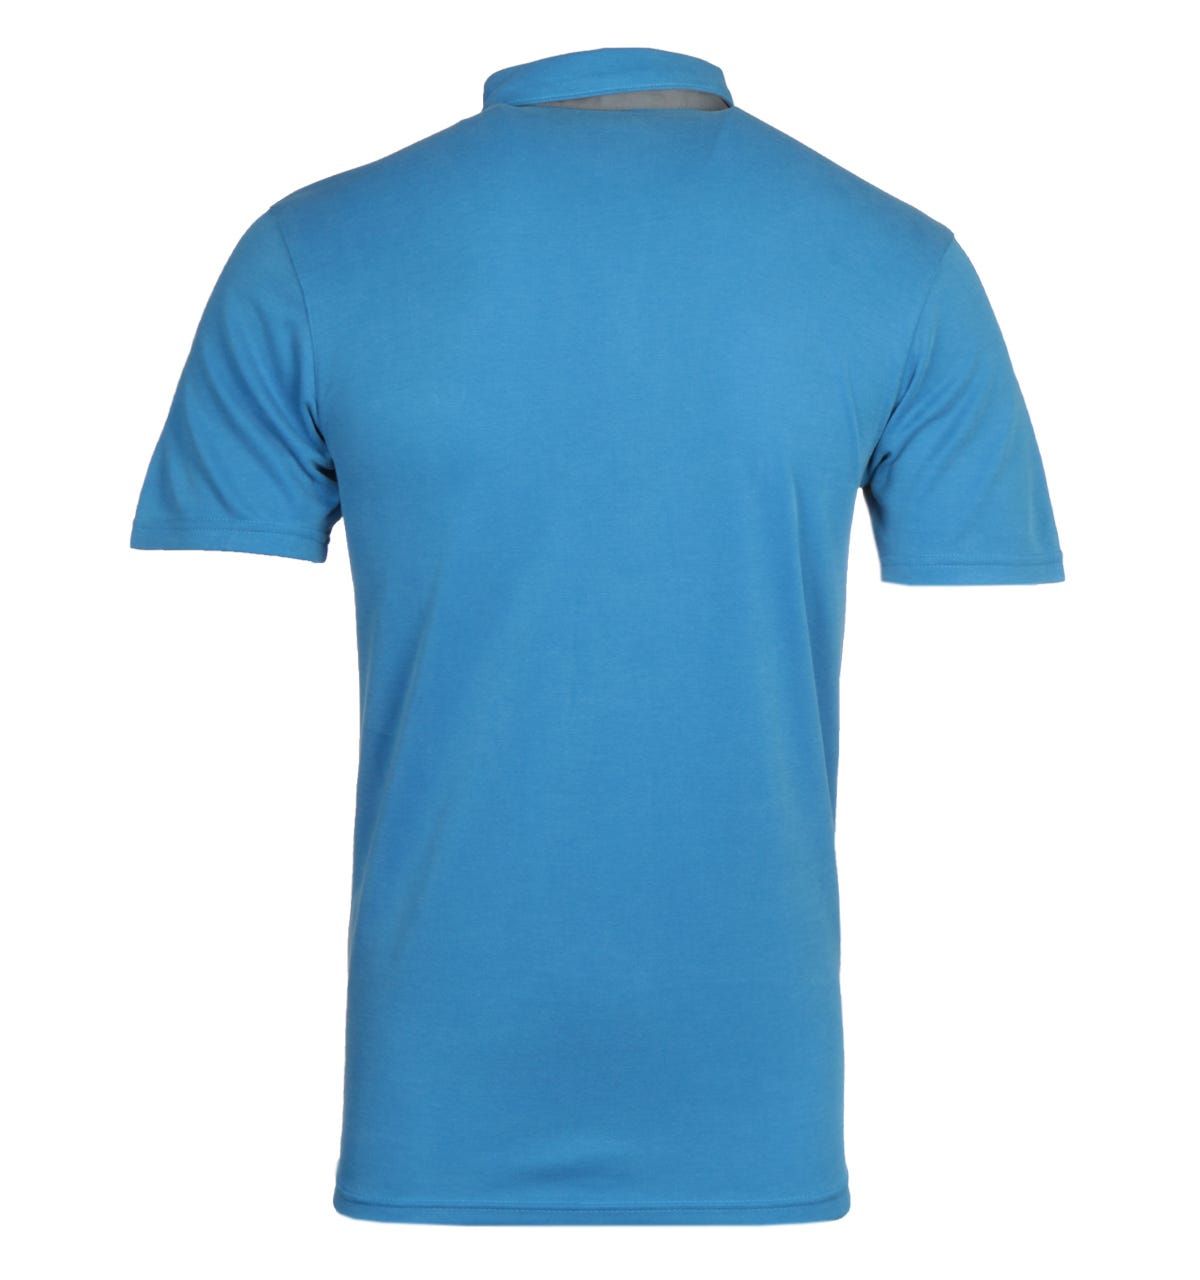 <p>A cool-season essential crafted by Columbia. The Columbia Nelson Point Blue Polo Shirt is a pure cotton composition fitted with a three-button placket and pointed down collar. The design is finished with the Columbia logo printed on to the chest.</p><ul><li>Cotton composition</li><li>Three button placket</li><li>Short sleeve</li><li>Pointed down collar</li><li>Tonal stitching throughout</li><li>Columbia logo printed on the chest</li></ul><p>Style & Fit:</p><ul><li>Regular fit</li><li>Fits true to size</li></ul><p>Fabric Composition & Care:</p><ul><li>100% Cotton</li><li>Machine wash</li></ul>